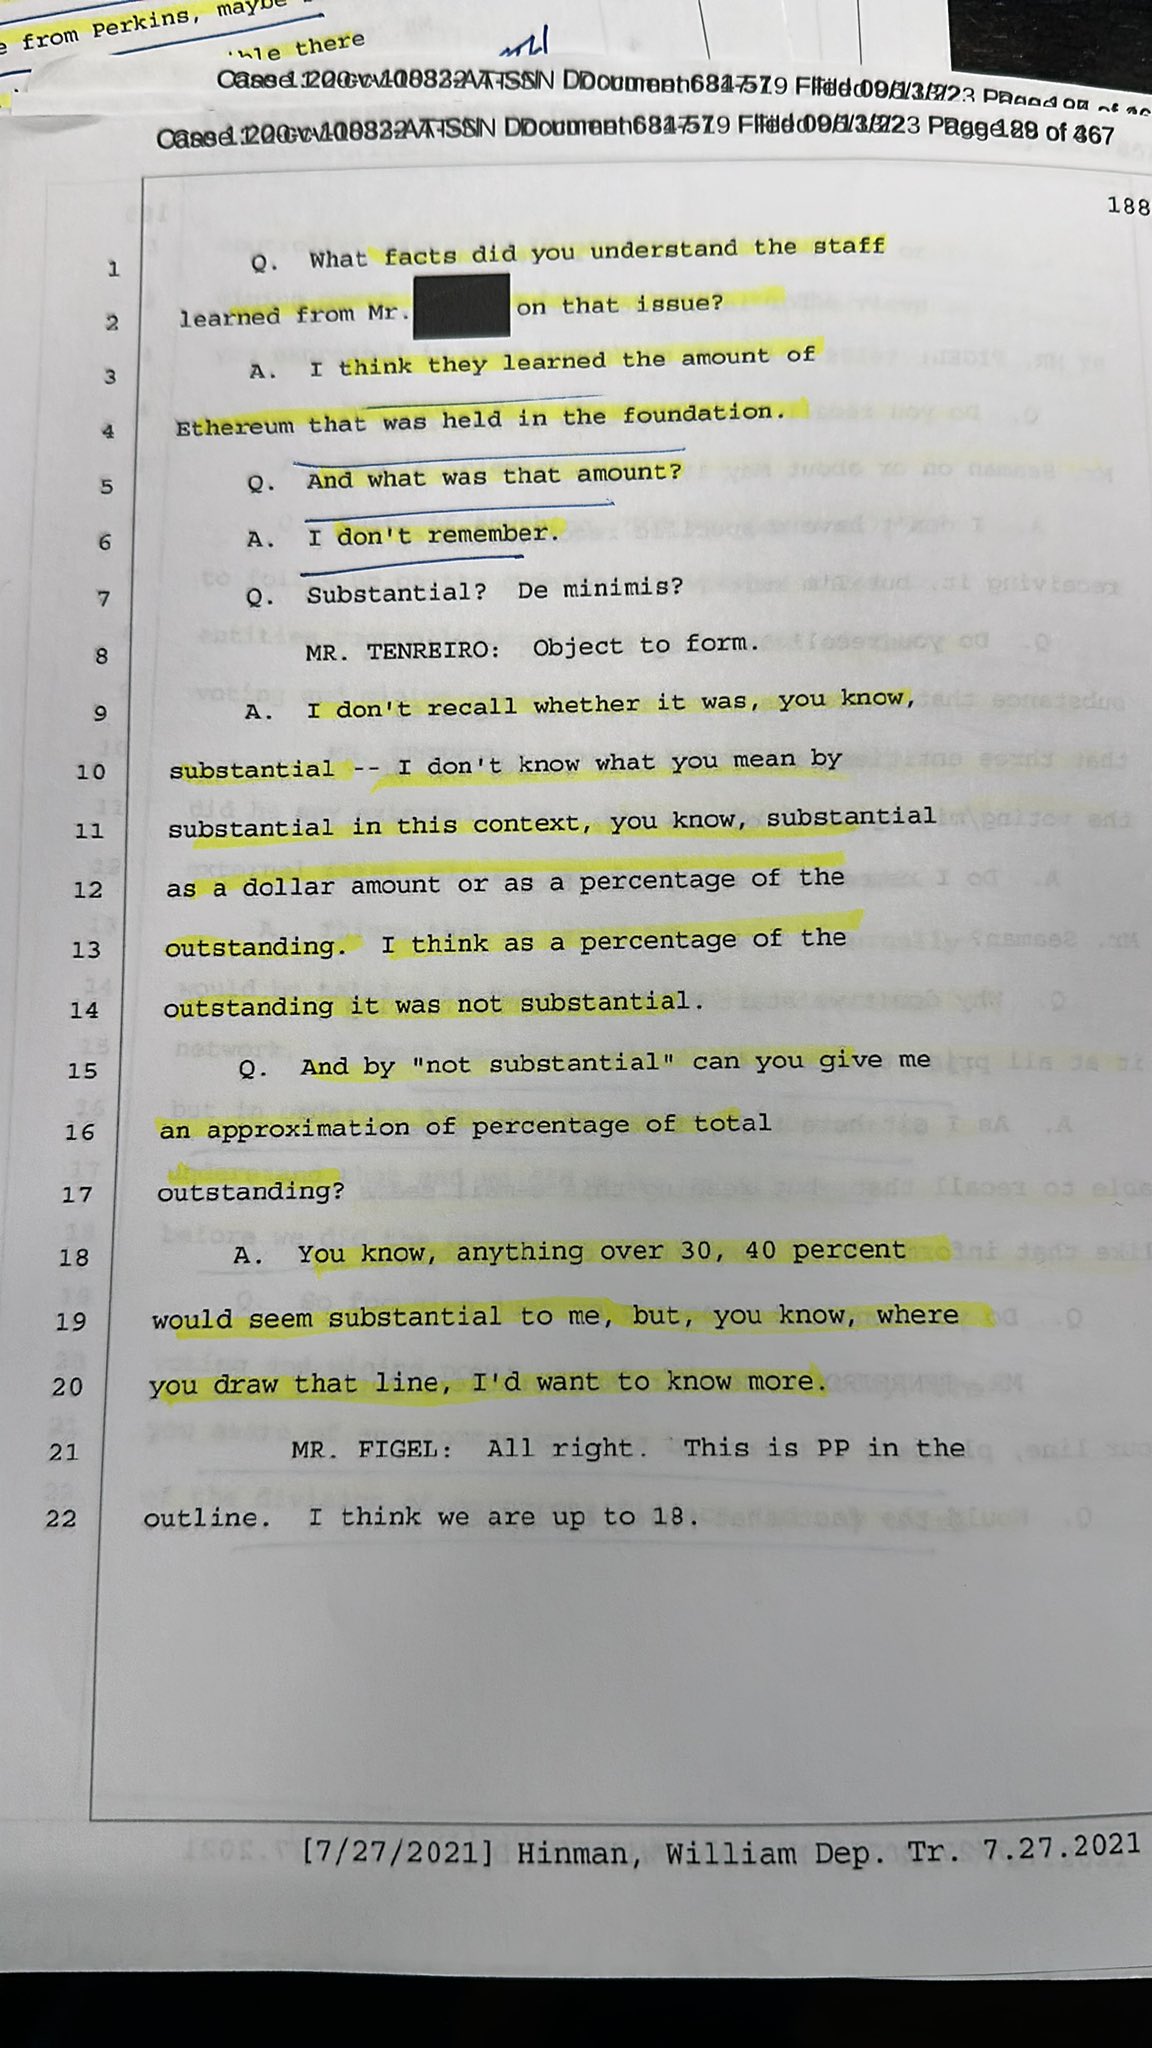 Documents outlining Hinman's views on token ownership